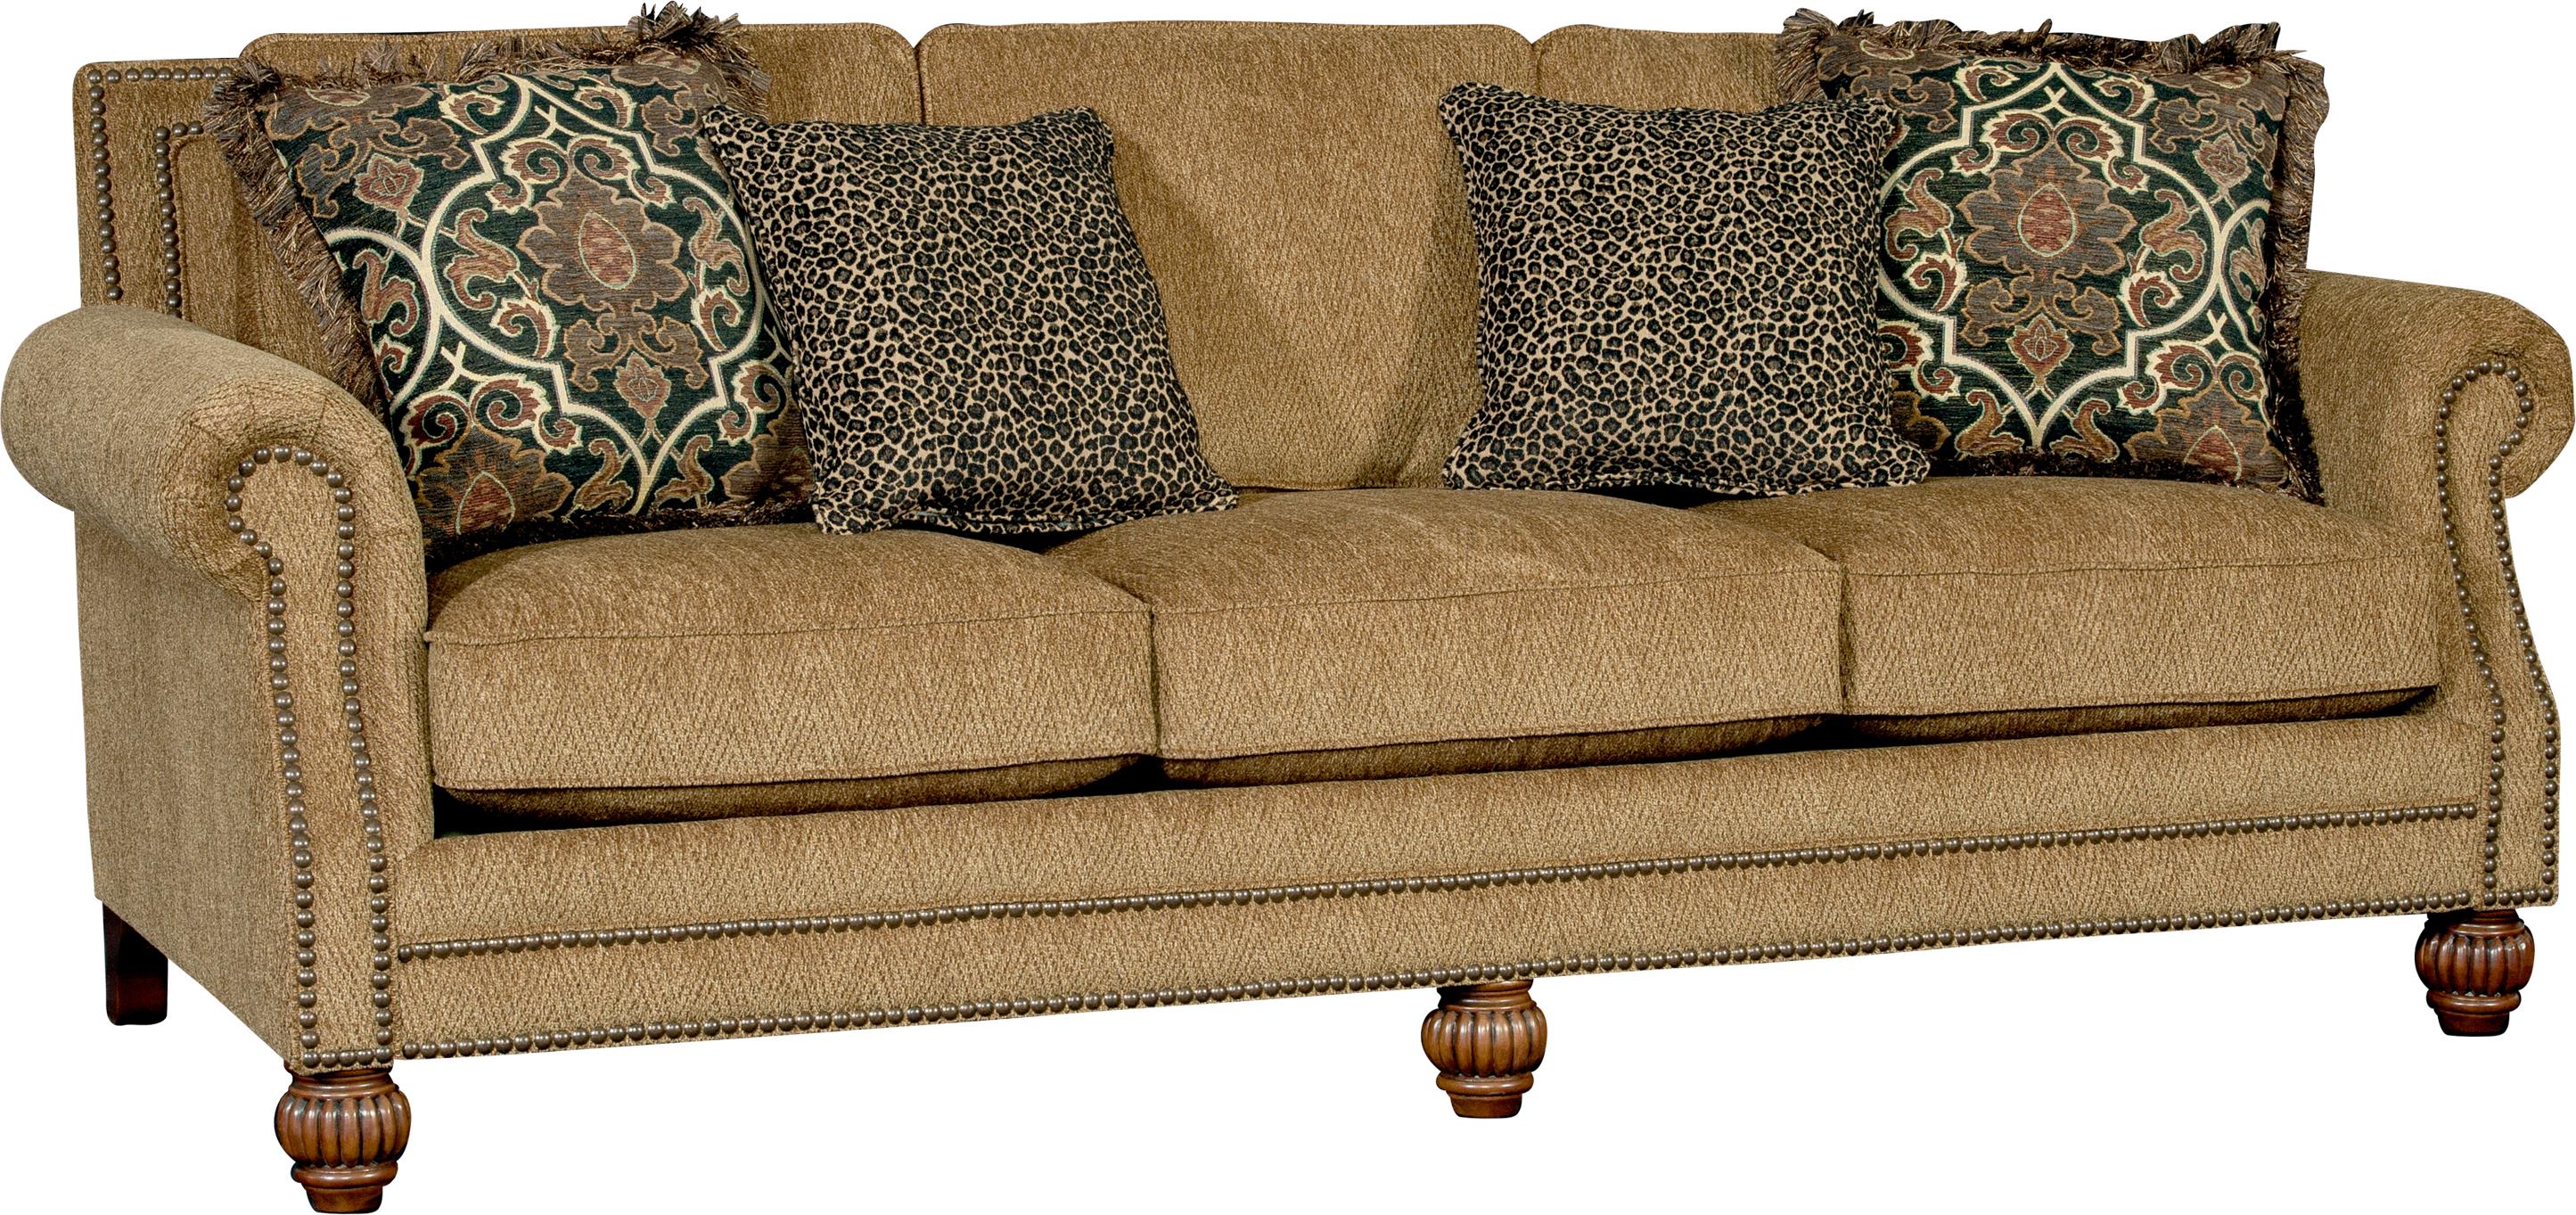 Traditional Sofa with Rolled Arms and Carved Wood Feet